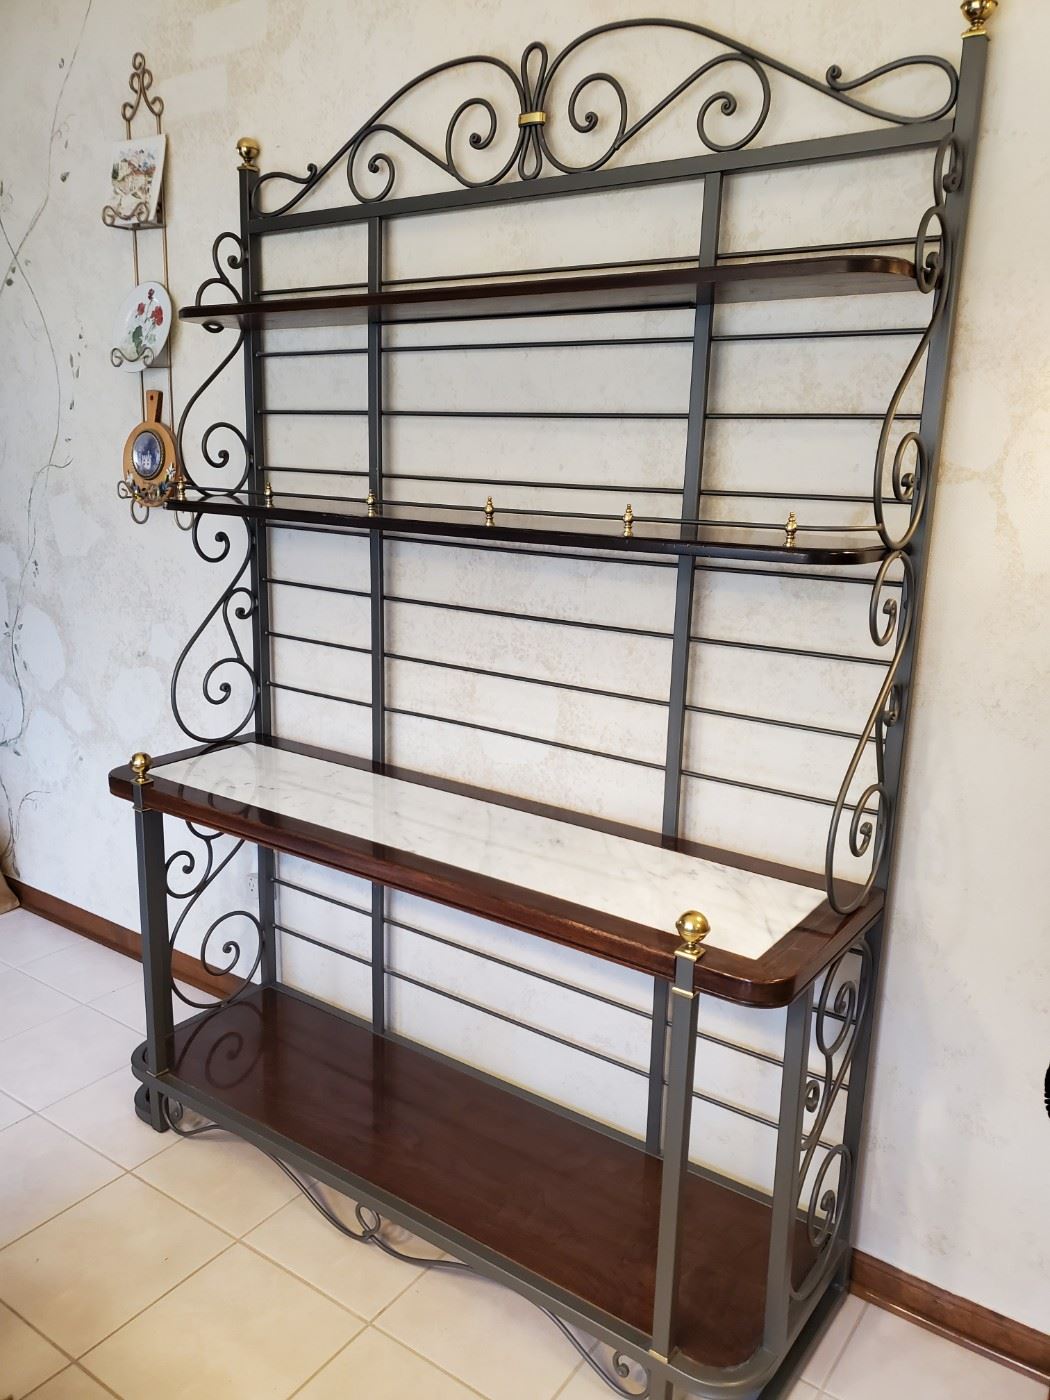 Italian Made Bakker's Rack with Marble Accent